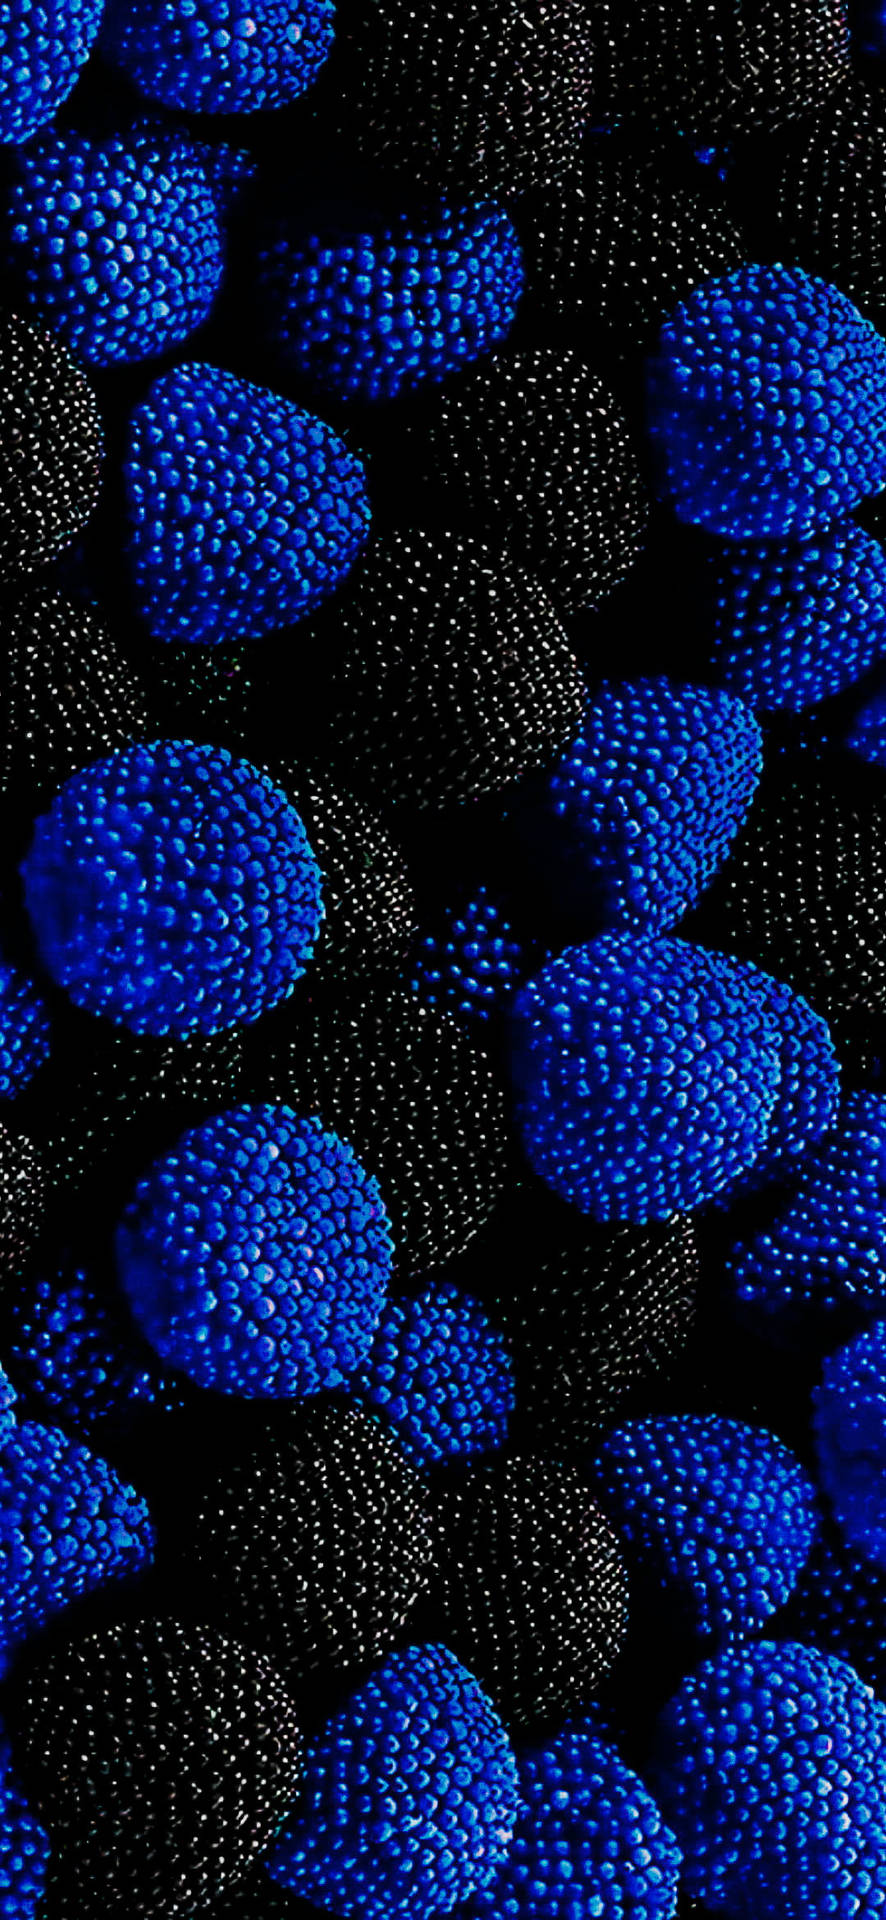 Blue And Black Berries On Samsung Full Hd Background